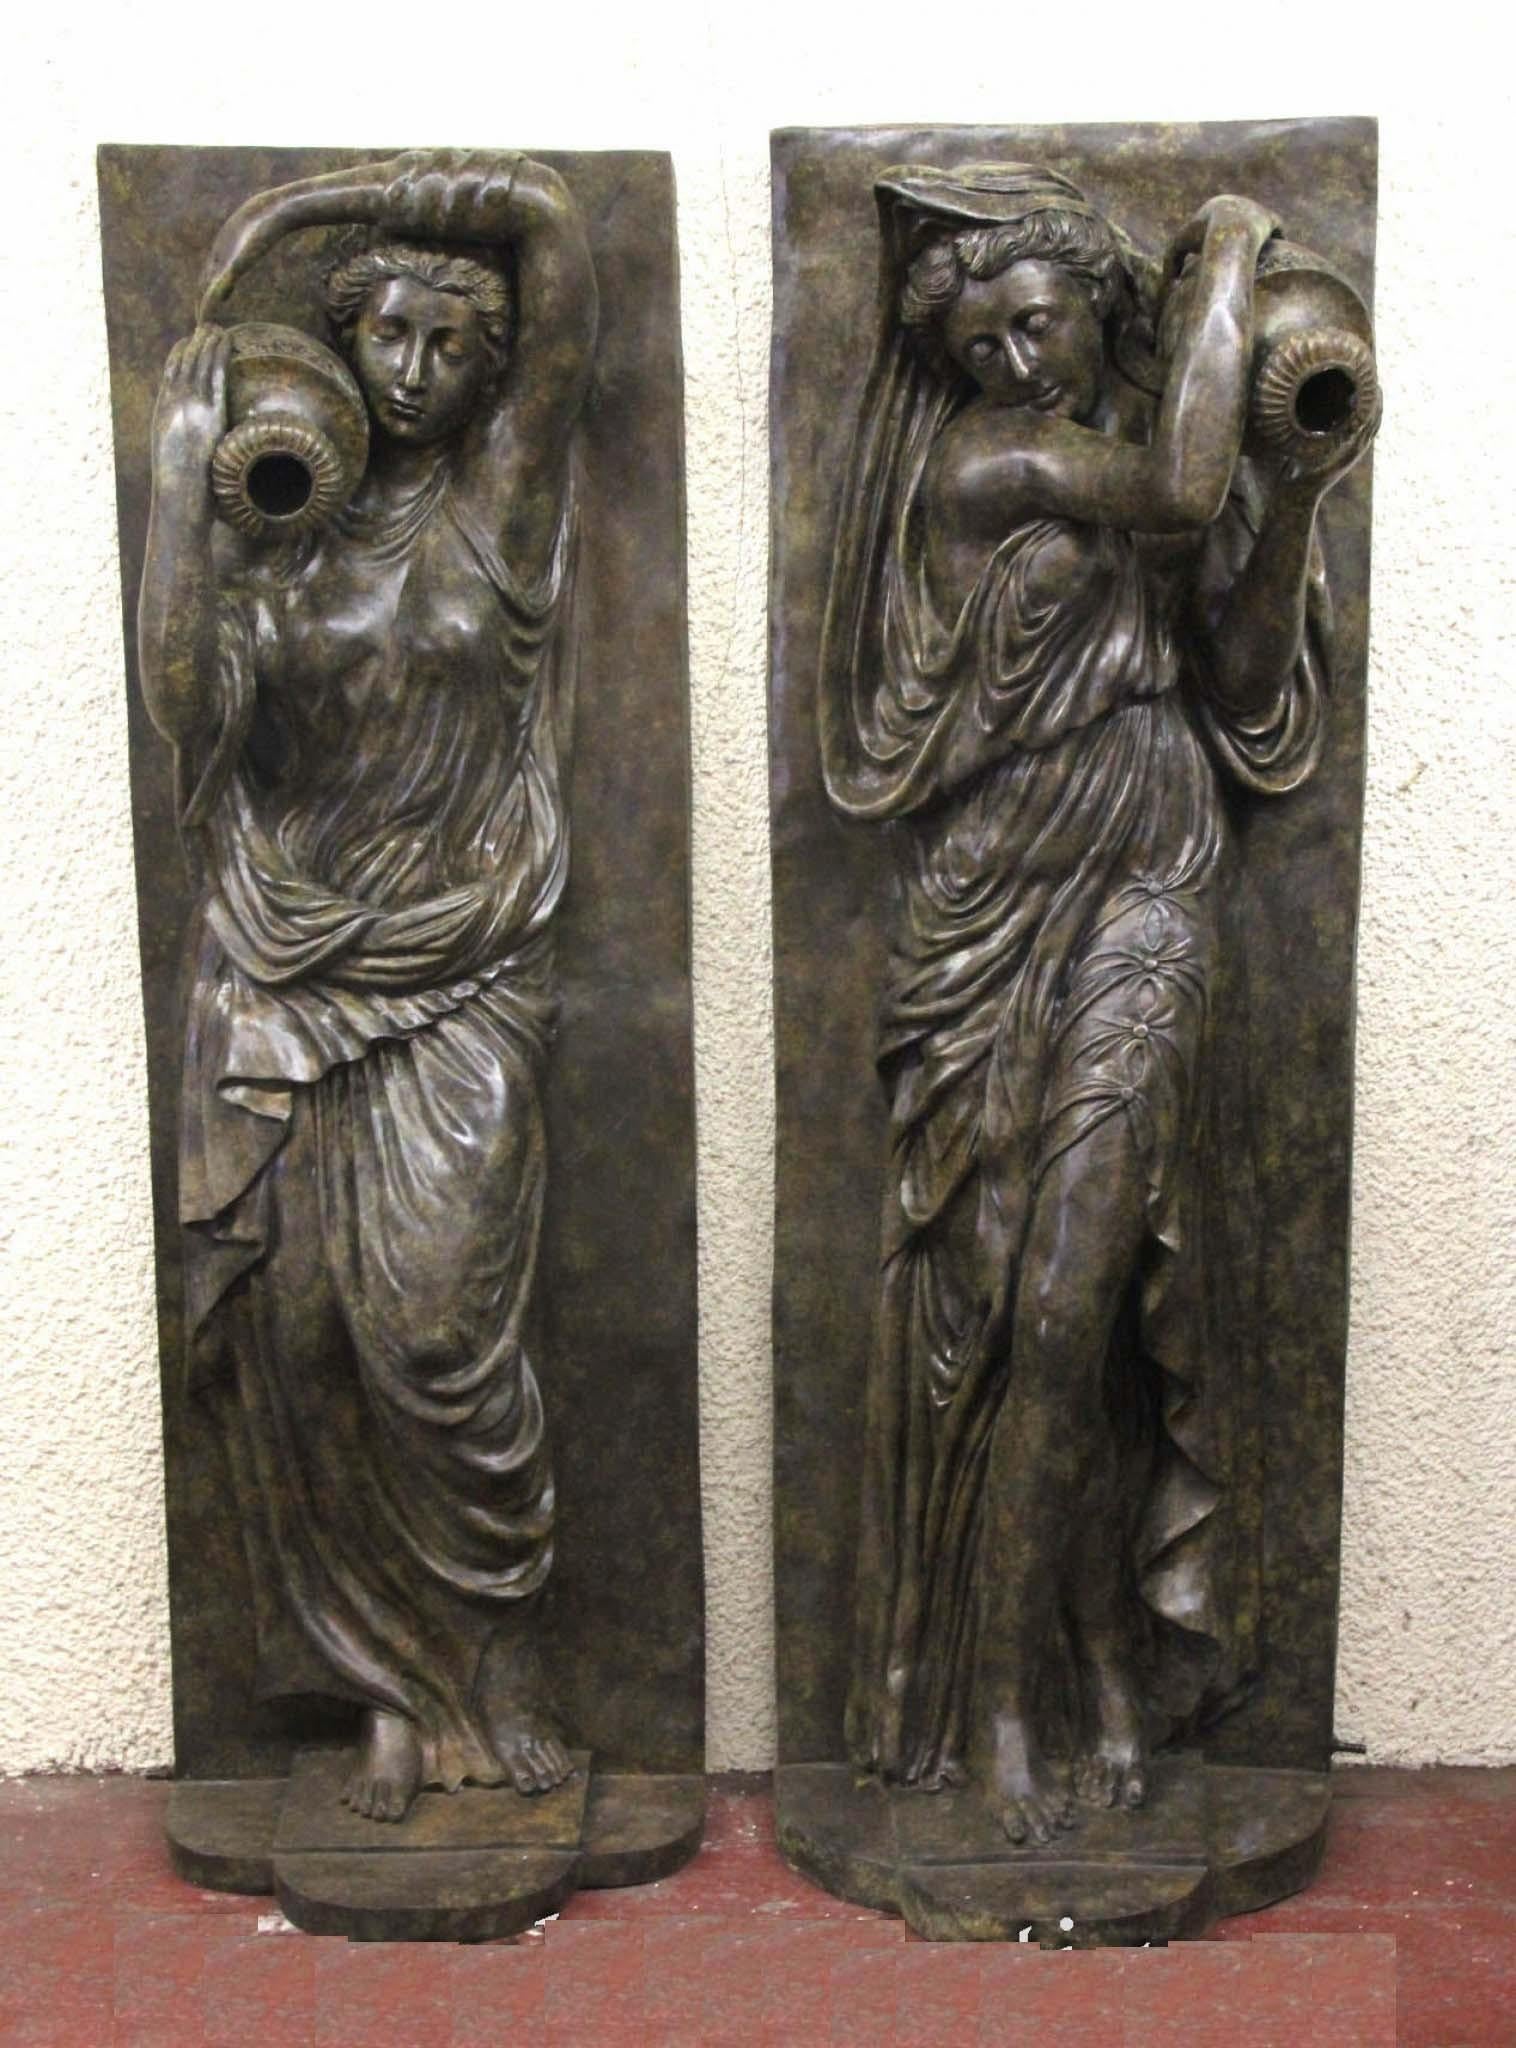 Gorgeous pair of large Italian bronze toga clad maiden wall fountains
Great for standing against a wall
There  is a water intet at the back and the water spouts from the classical urn when connectted to a water supply
Note if you would like to view